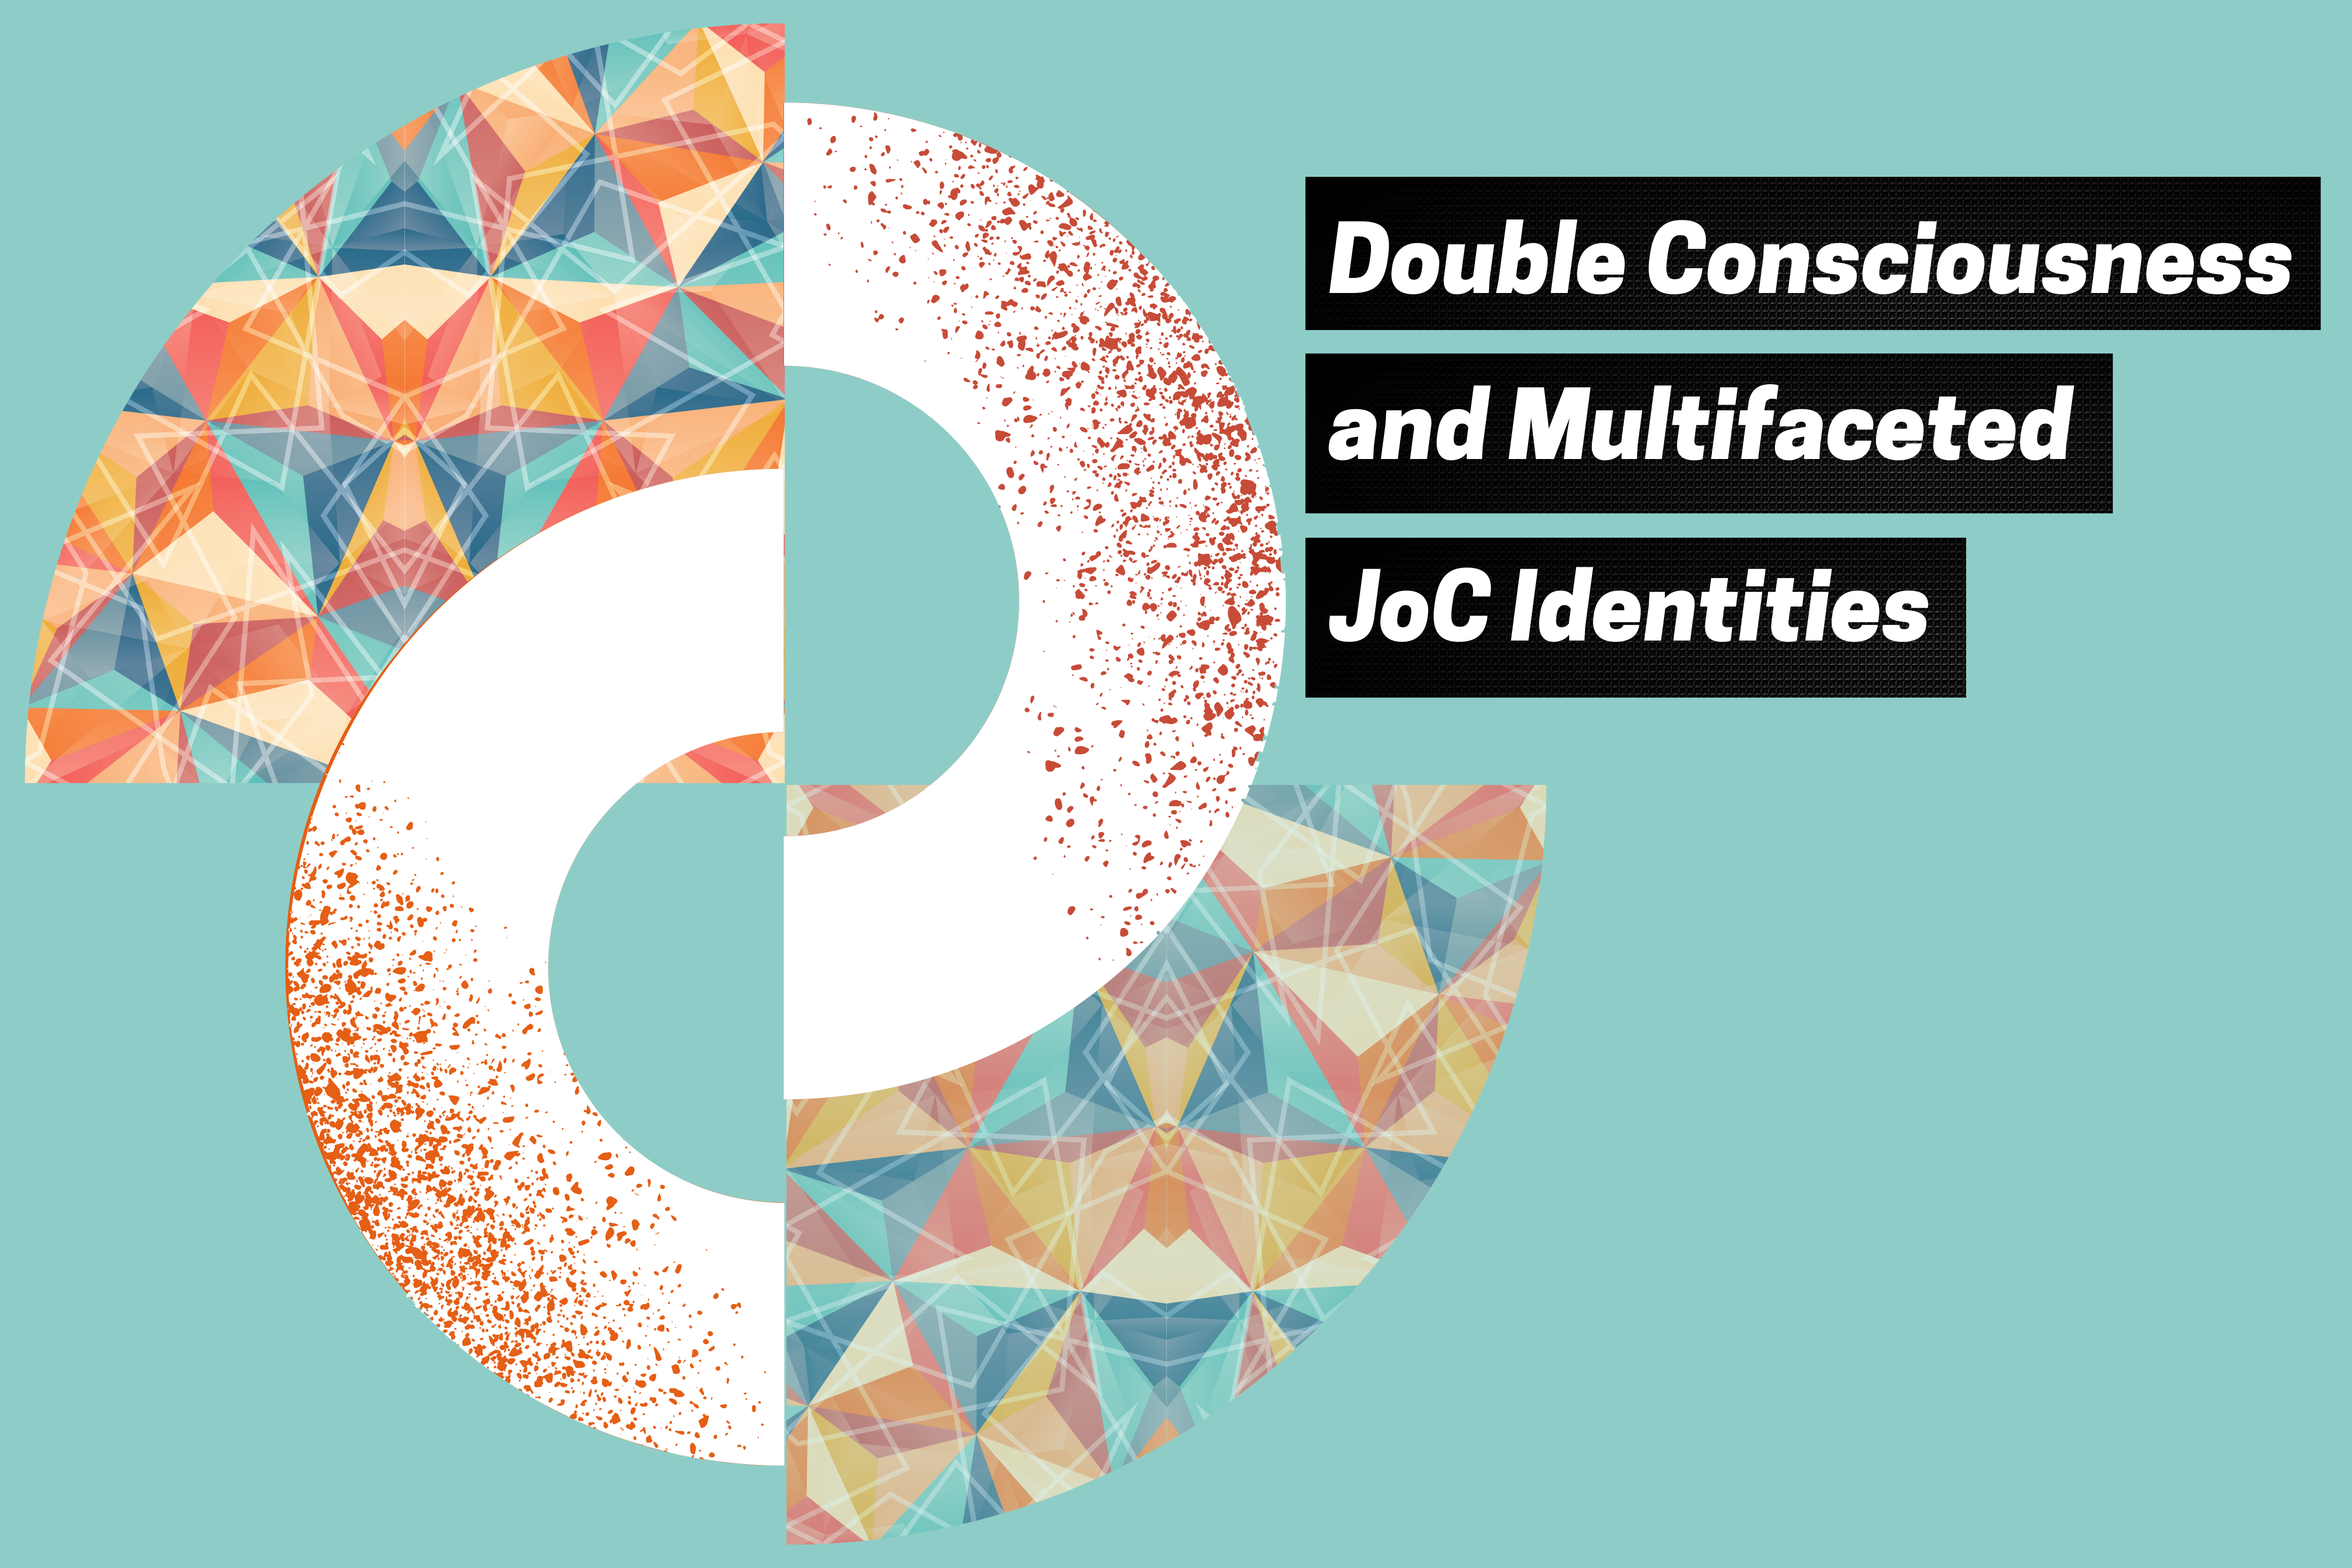 "Double Consciousness and Multifaceted JoC Identities" on solid teal background with asymmetrical mirror image graphic with prism elements 